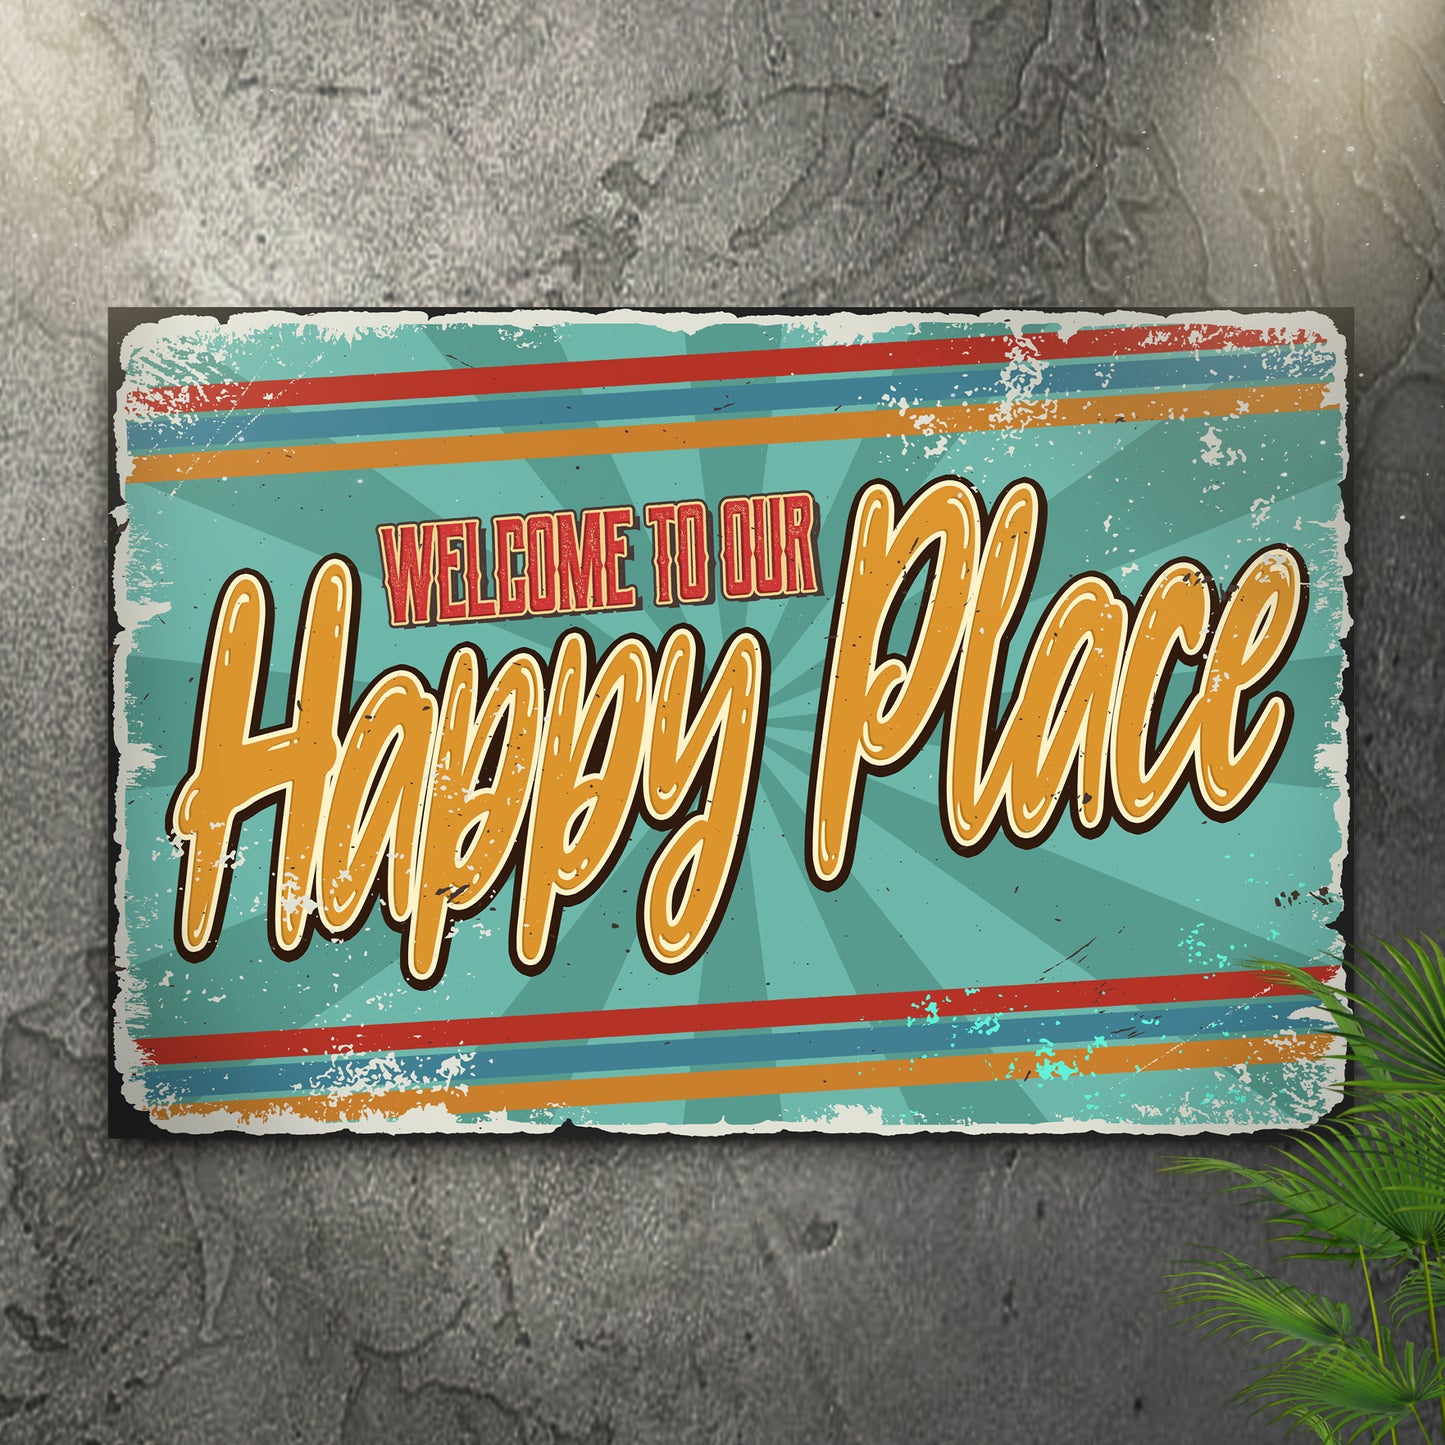 Welcome To Our Happy Place Sign - Image by Tailored Canvases